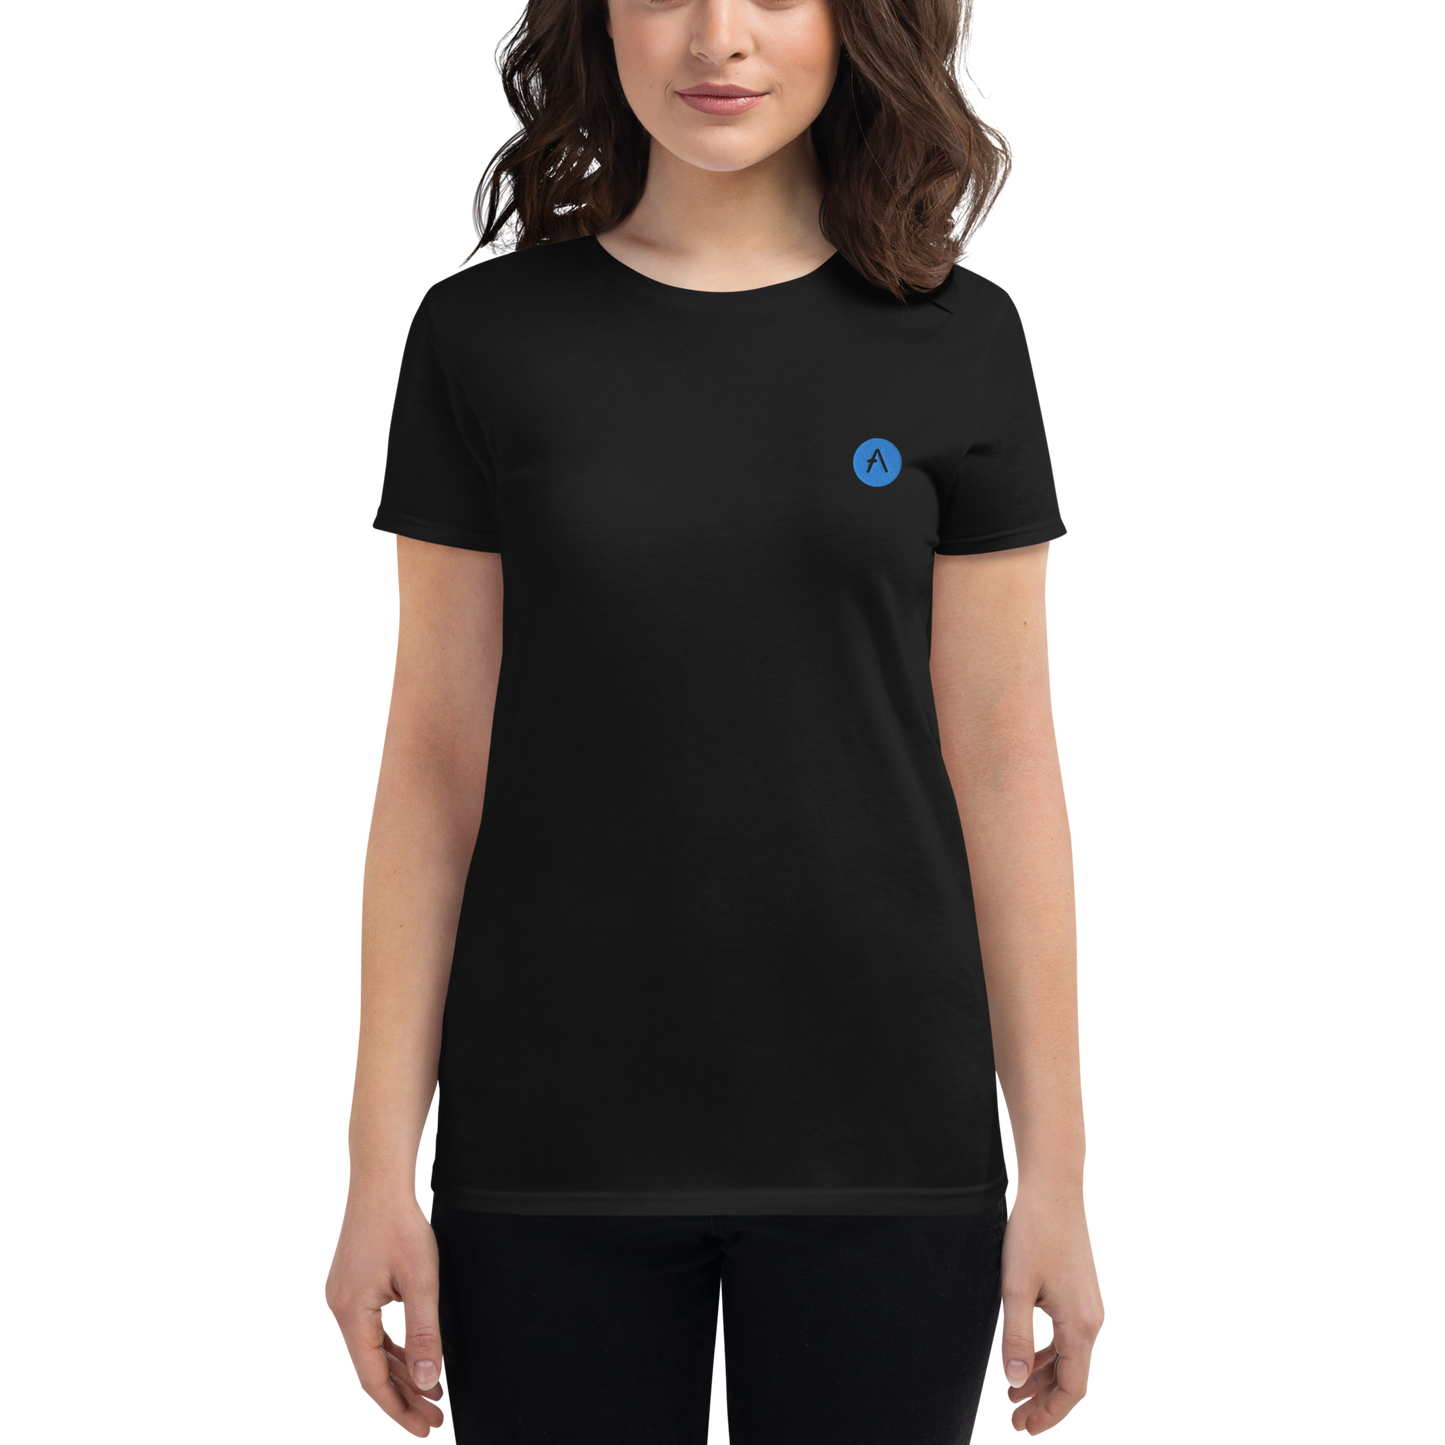 Aave (AAVE) - Women's short sleeve t-shirt